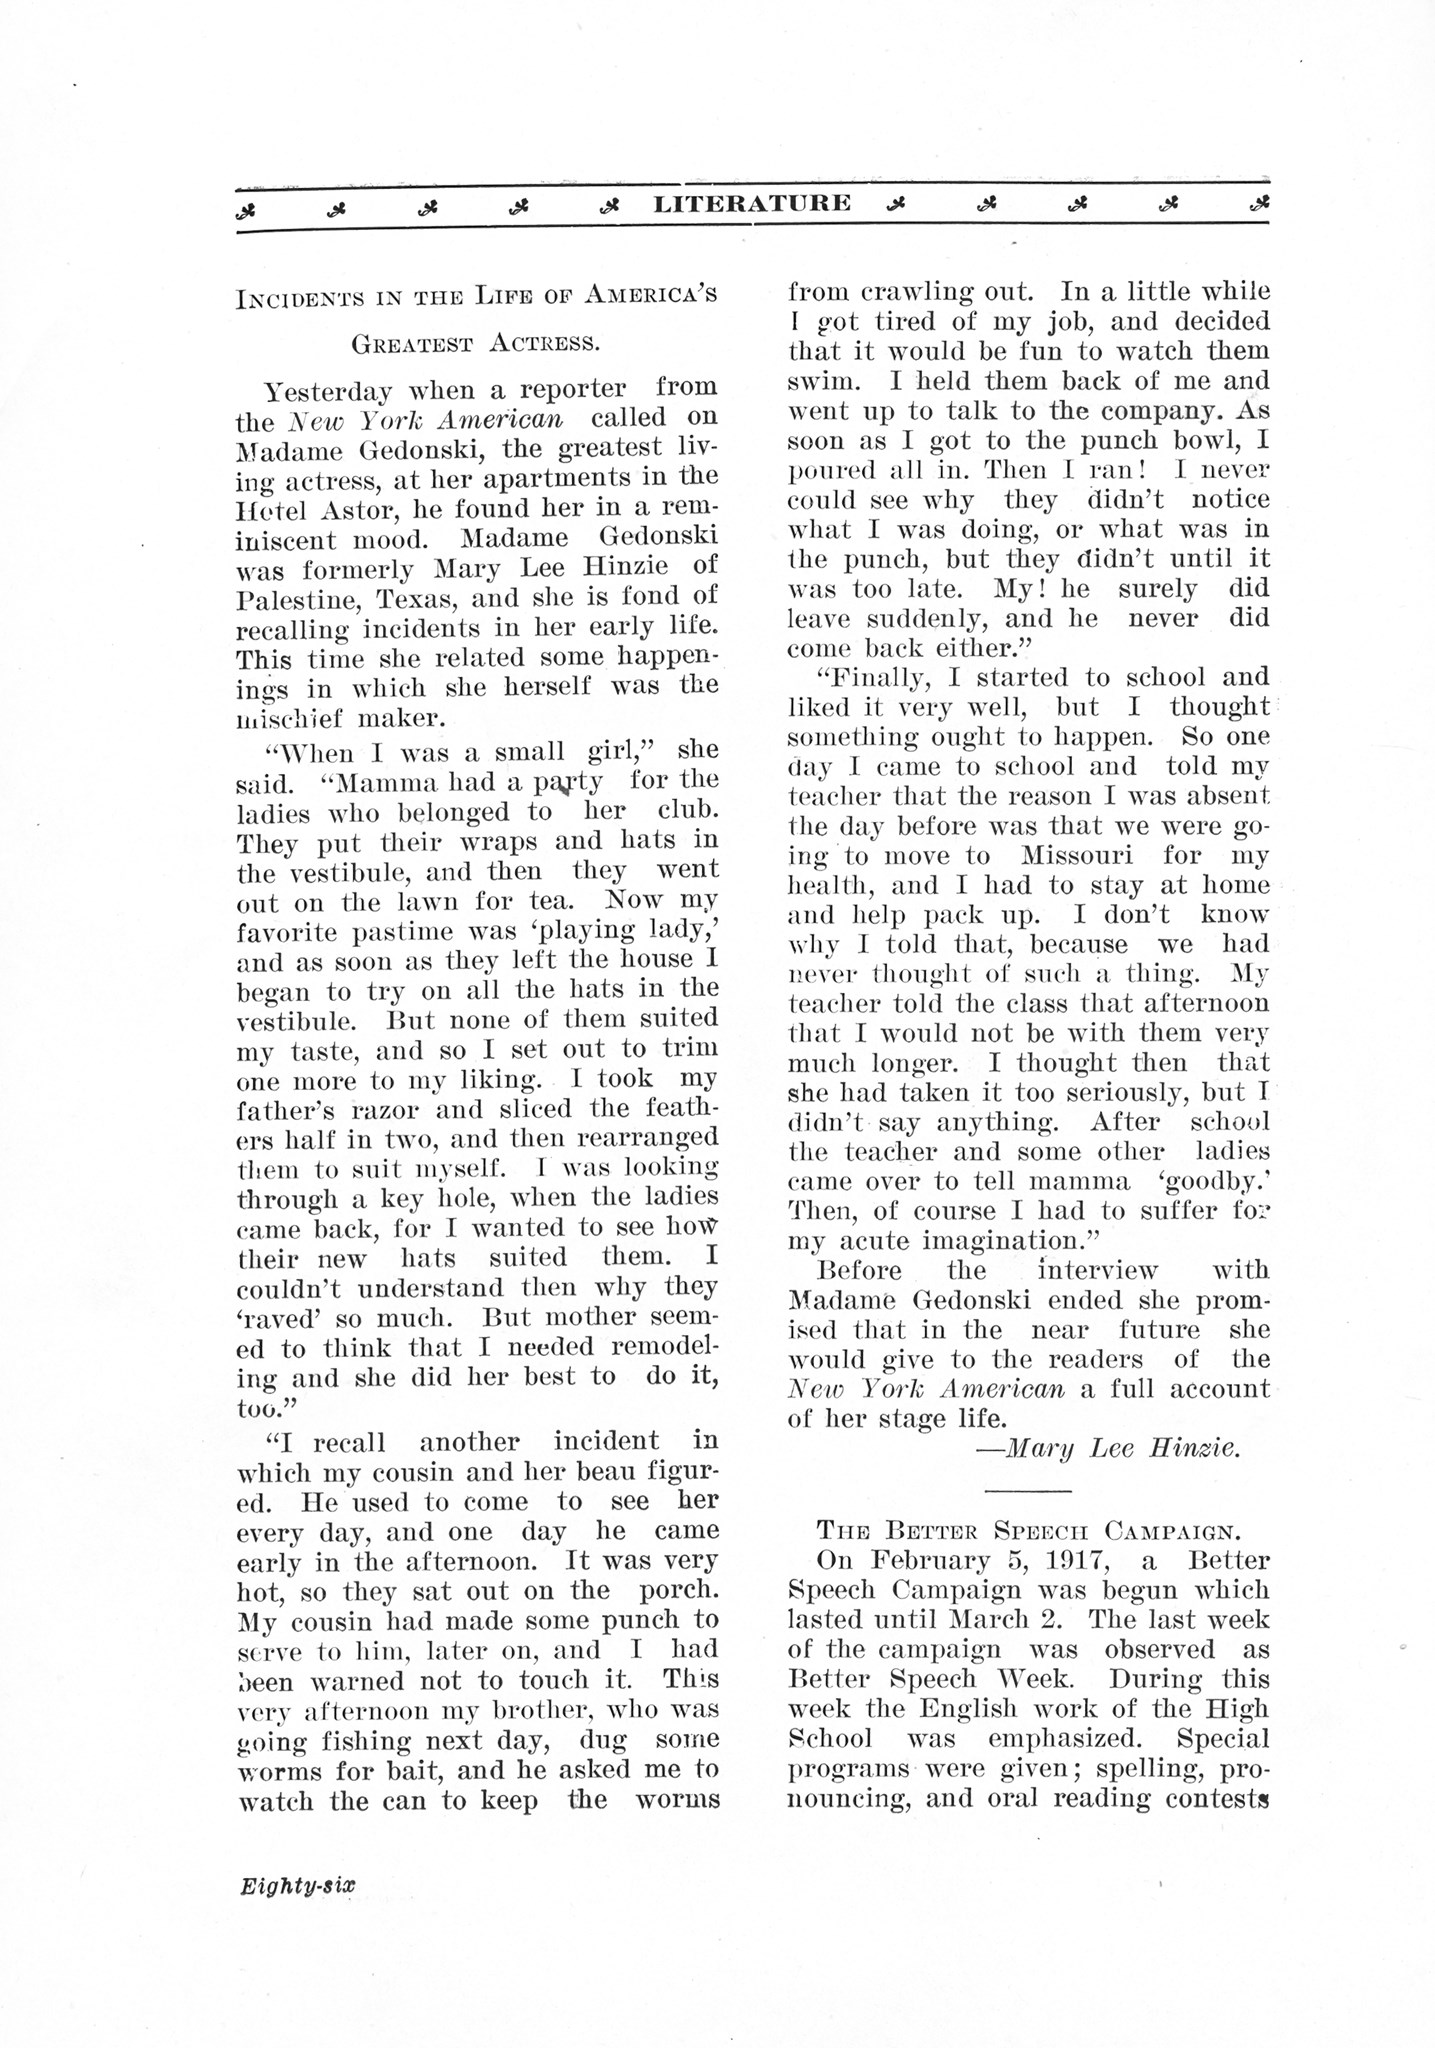 ../../../Images/Large/1917/Arclight-1917-pg0086.jpg